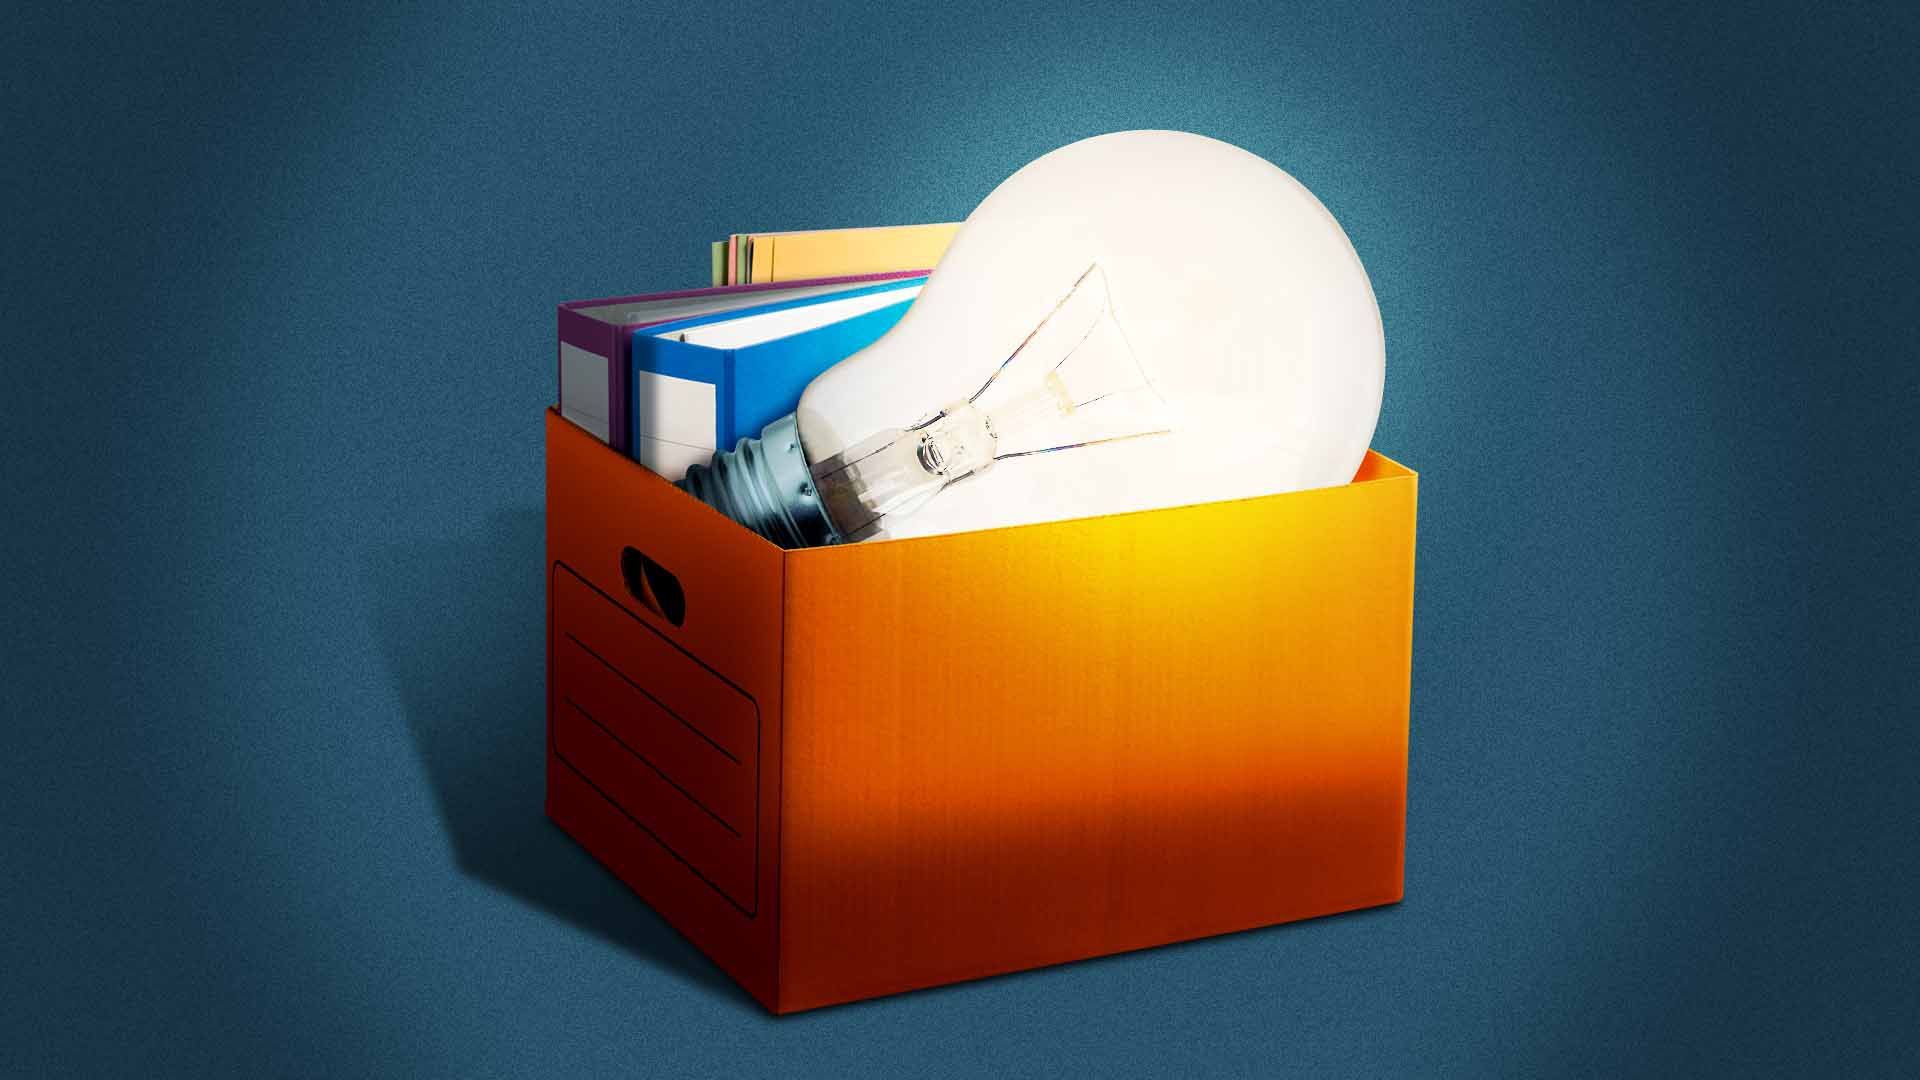 Illustration of a lit lightbulb in a cardboard box of office items